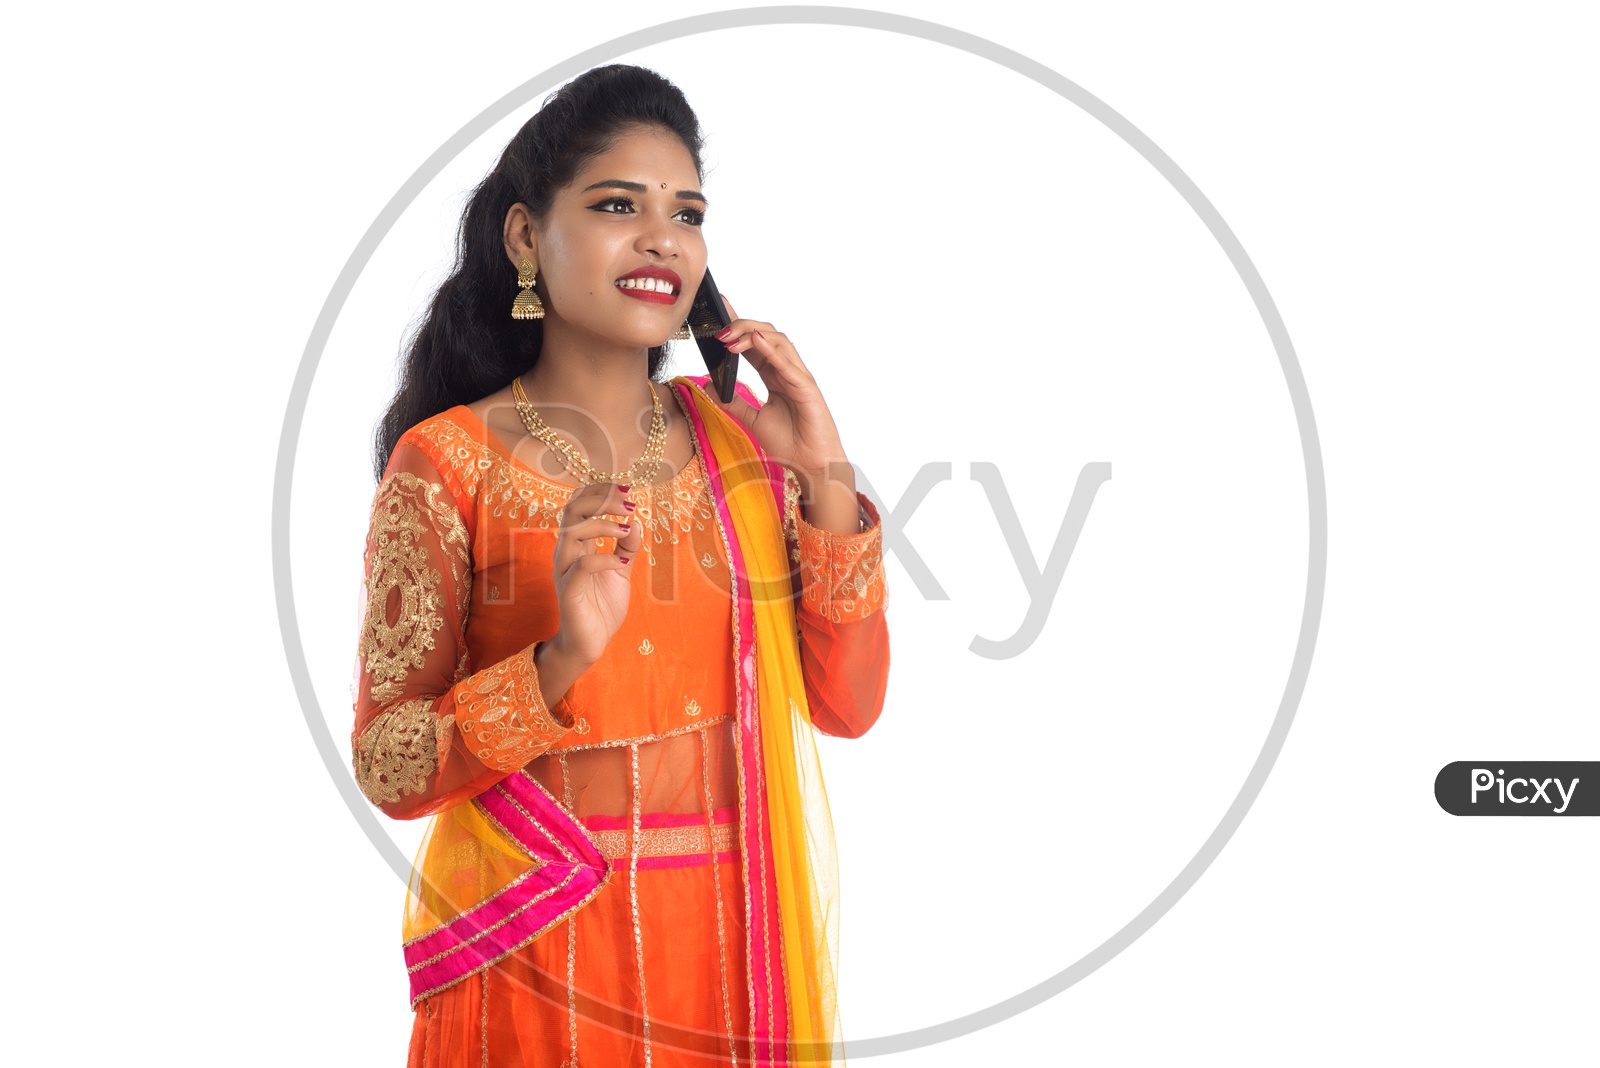 A young traditional Indian woman talking on a mobile phone or smart phone